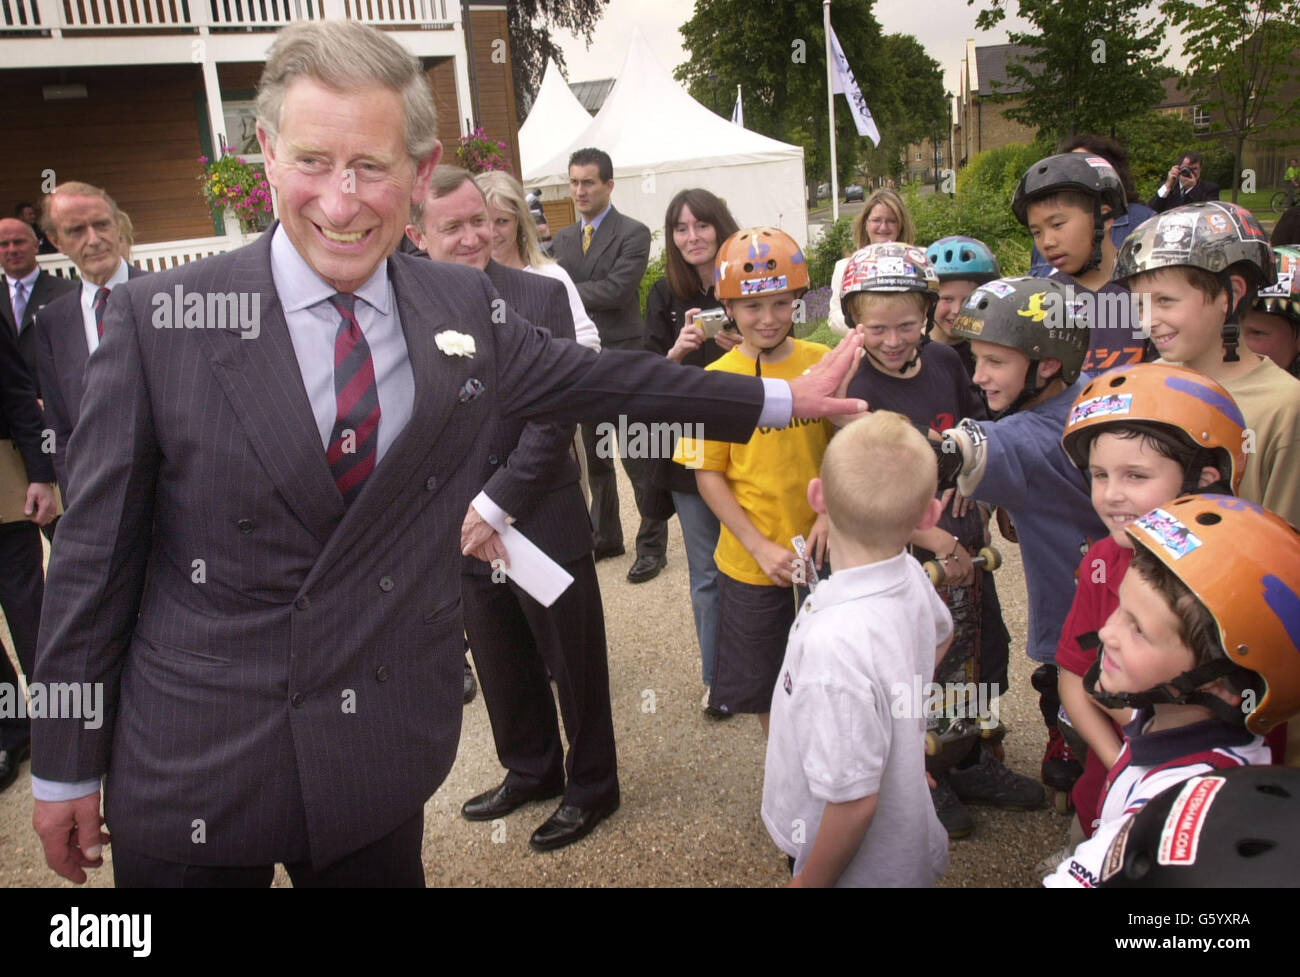 The Prince Of Wales meets children at 'The Village' in Caterham, Surrey, an army barracks which has been converted into a housing estate by the Guinness Trust, a charitable housing association of which the Prince is patron. *The 60 million mixed development has 96 affordable homes - for key workers and others on low incomes - and 252 for private sale, said a trust spokeswoman. Stock Photo